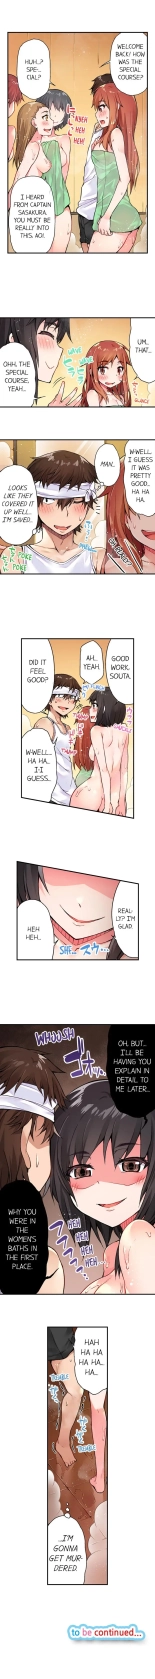 Traditional Job of Washing Girls' Body Ch. 1-181 : page 136